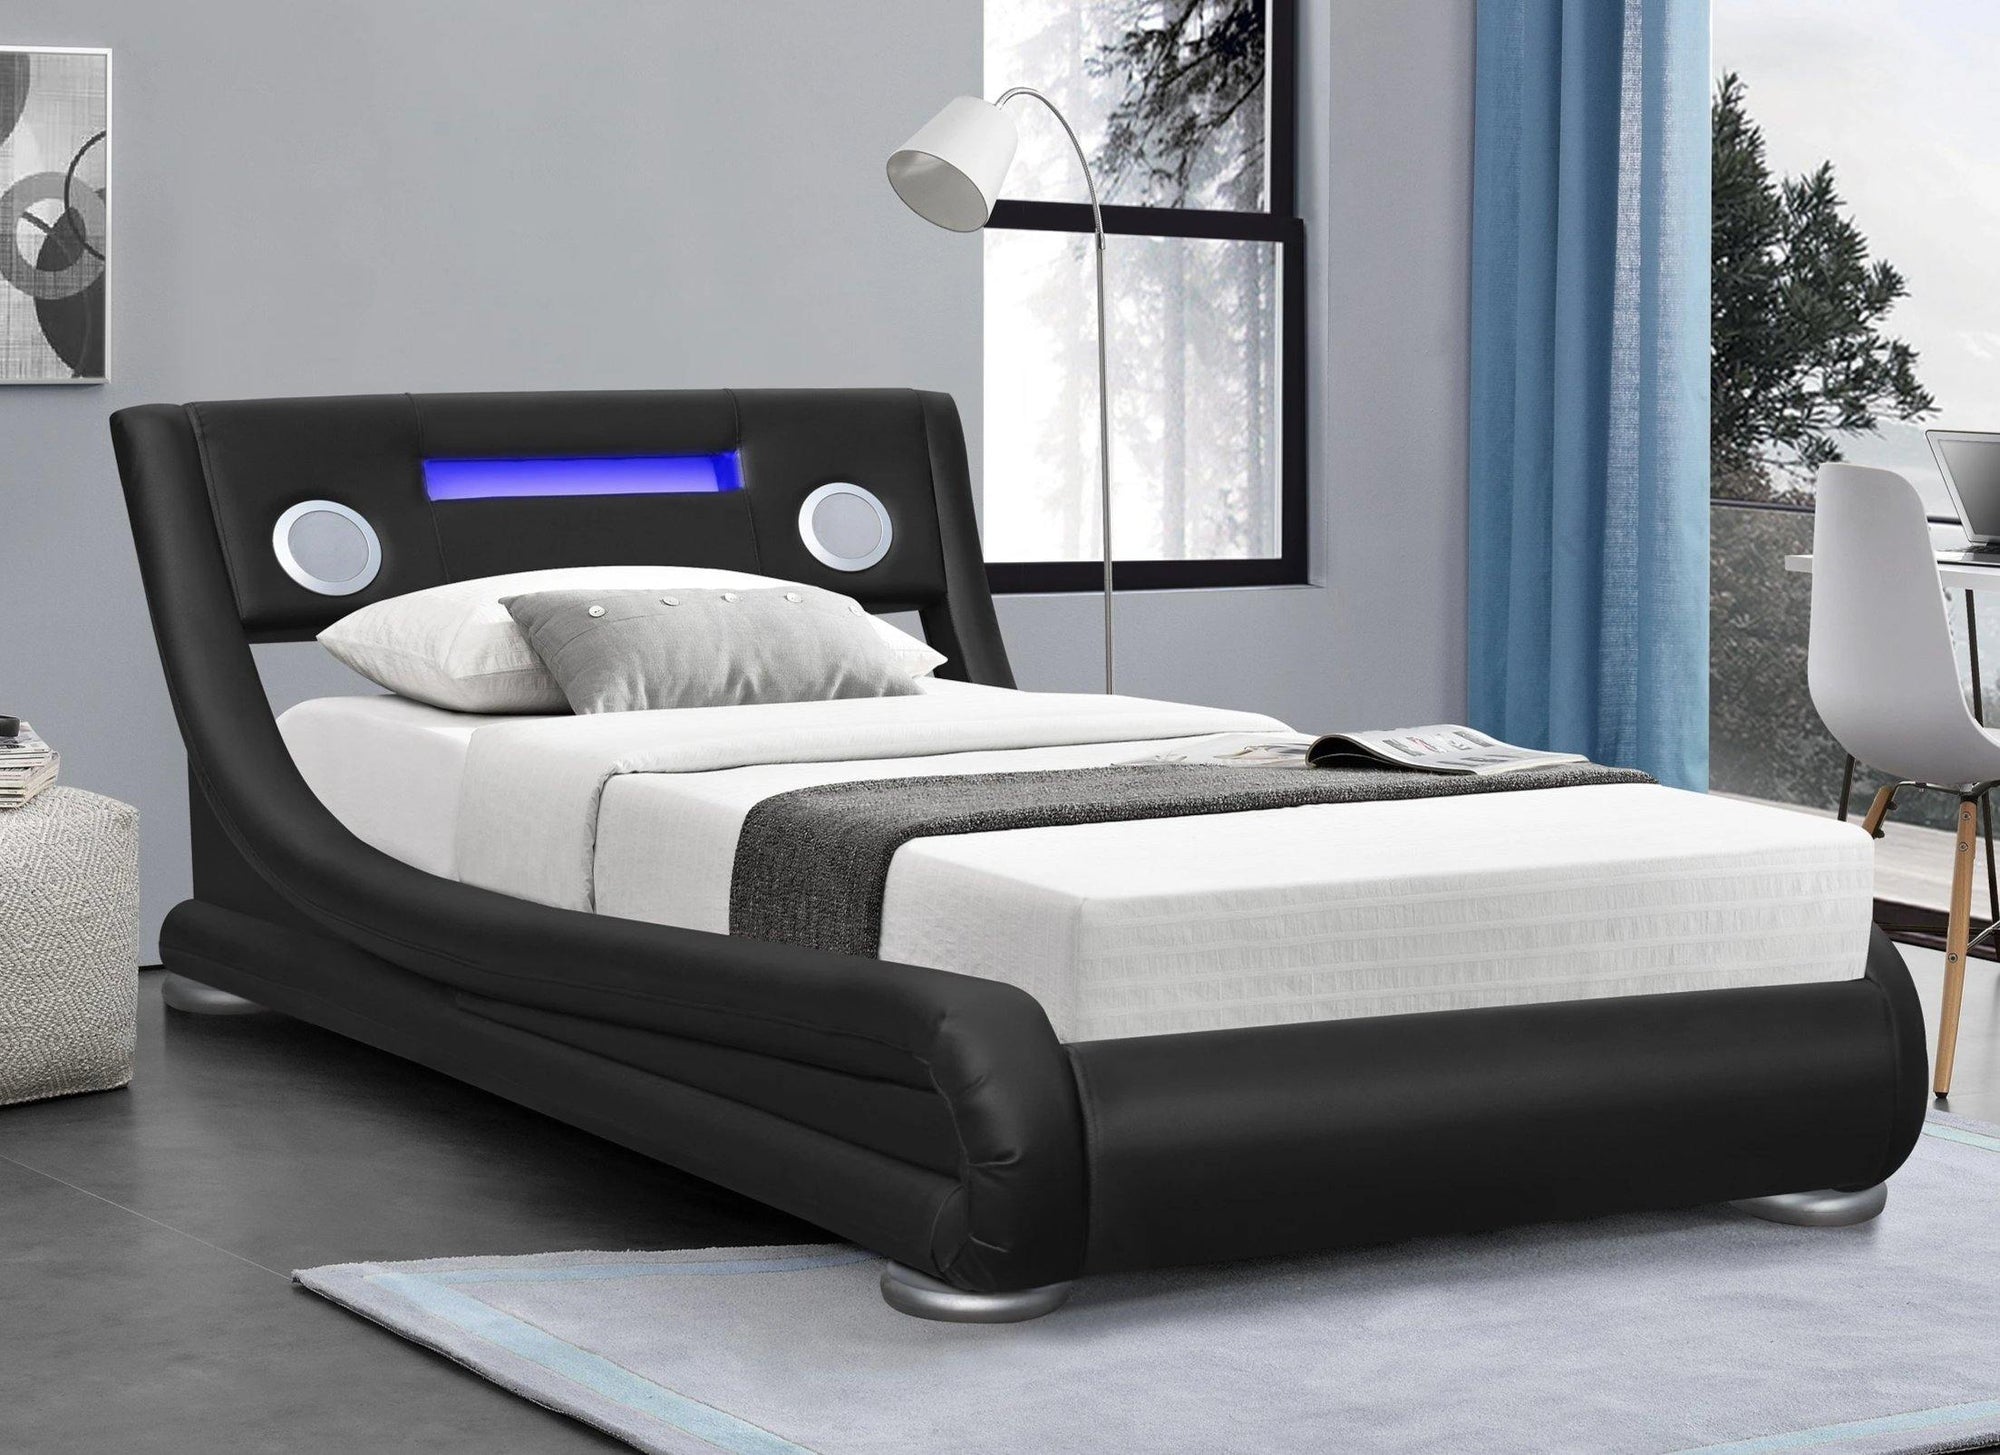 Mojo Bluetooth Speakers LED Bed - Black PU Leather - Size: Single Bed Casa Maria Designs 